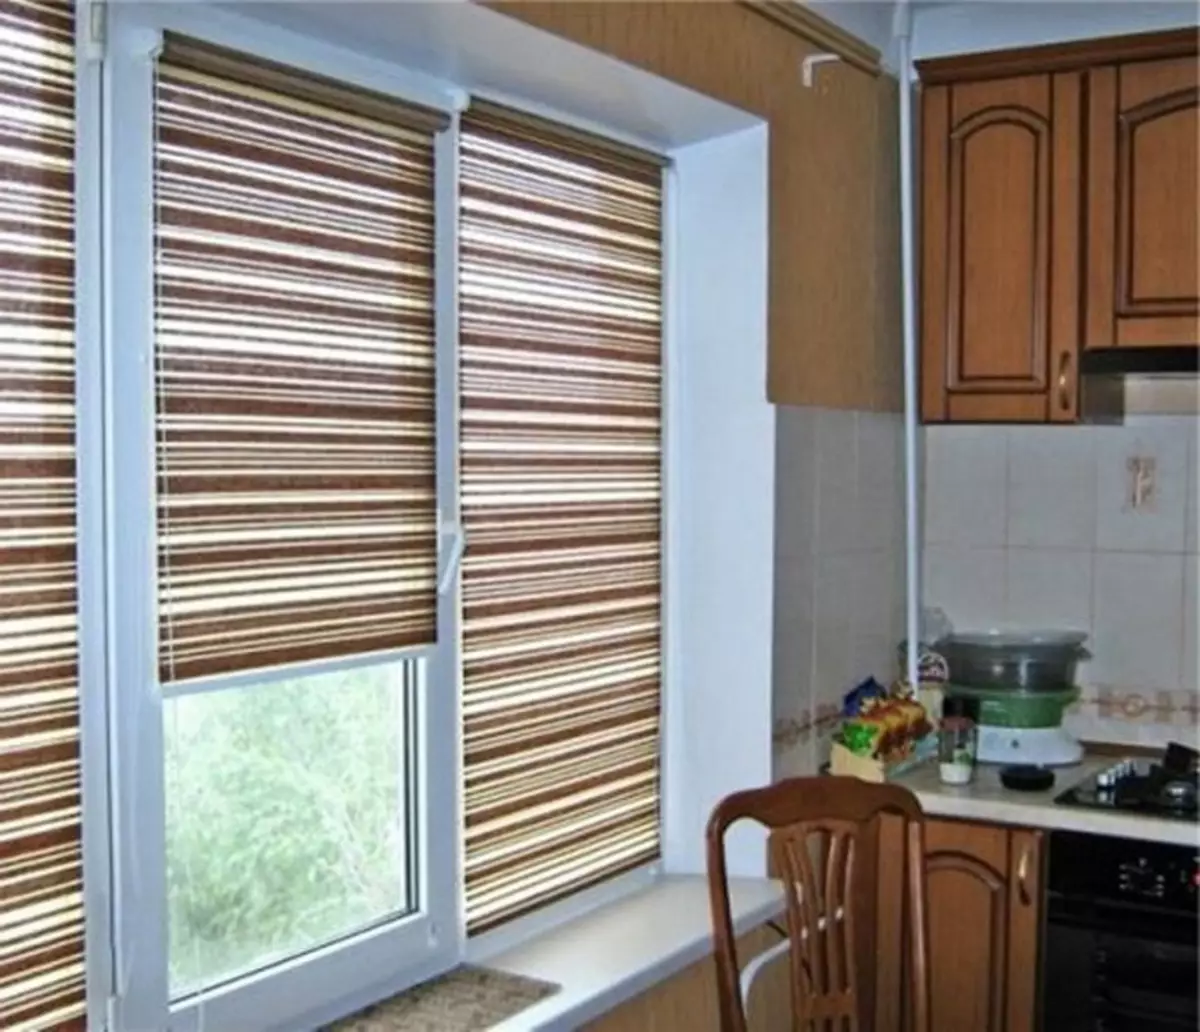 Choose curtains, curtains and kitchen blinds (30 photos)